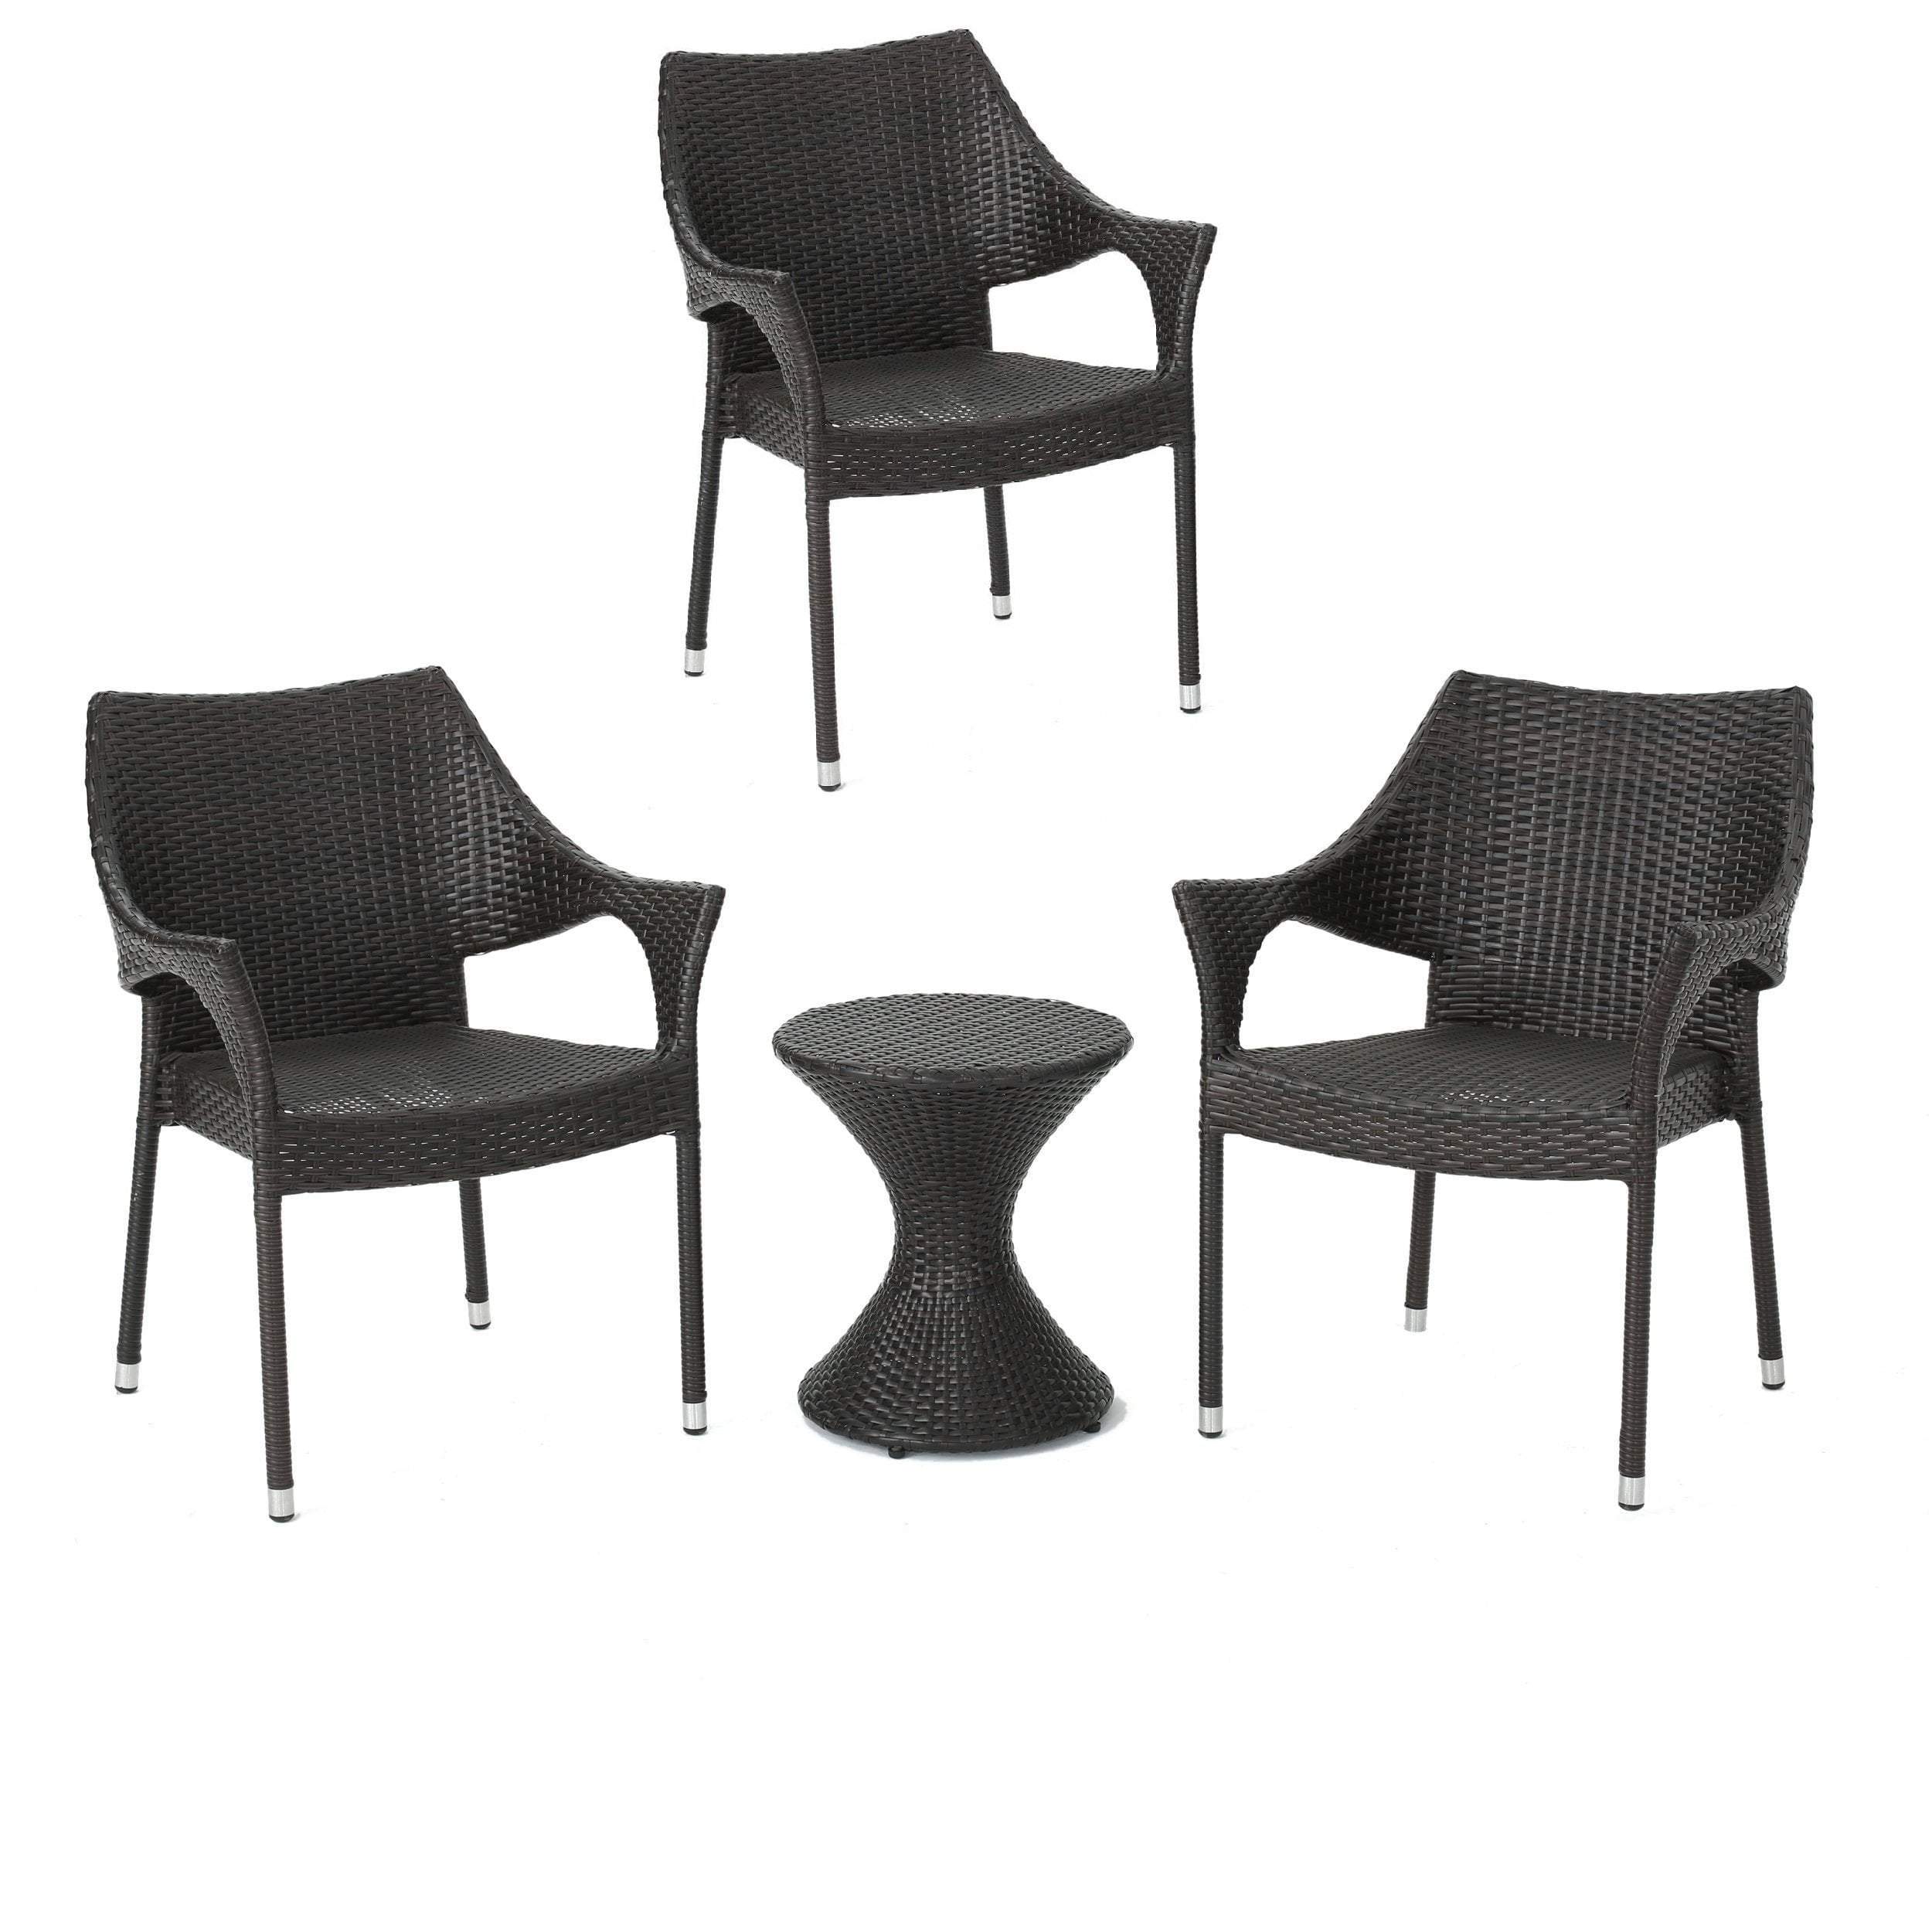 4 Piece Rattan Chat Set with Stacking Chairs and Hourglass Side Table Home Office Garden | HOG-HomeOfficeGarden | HOG-Home.Office.Garden